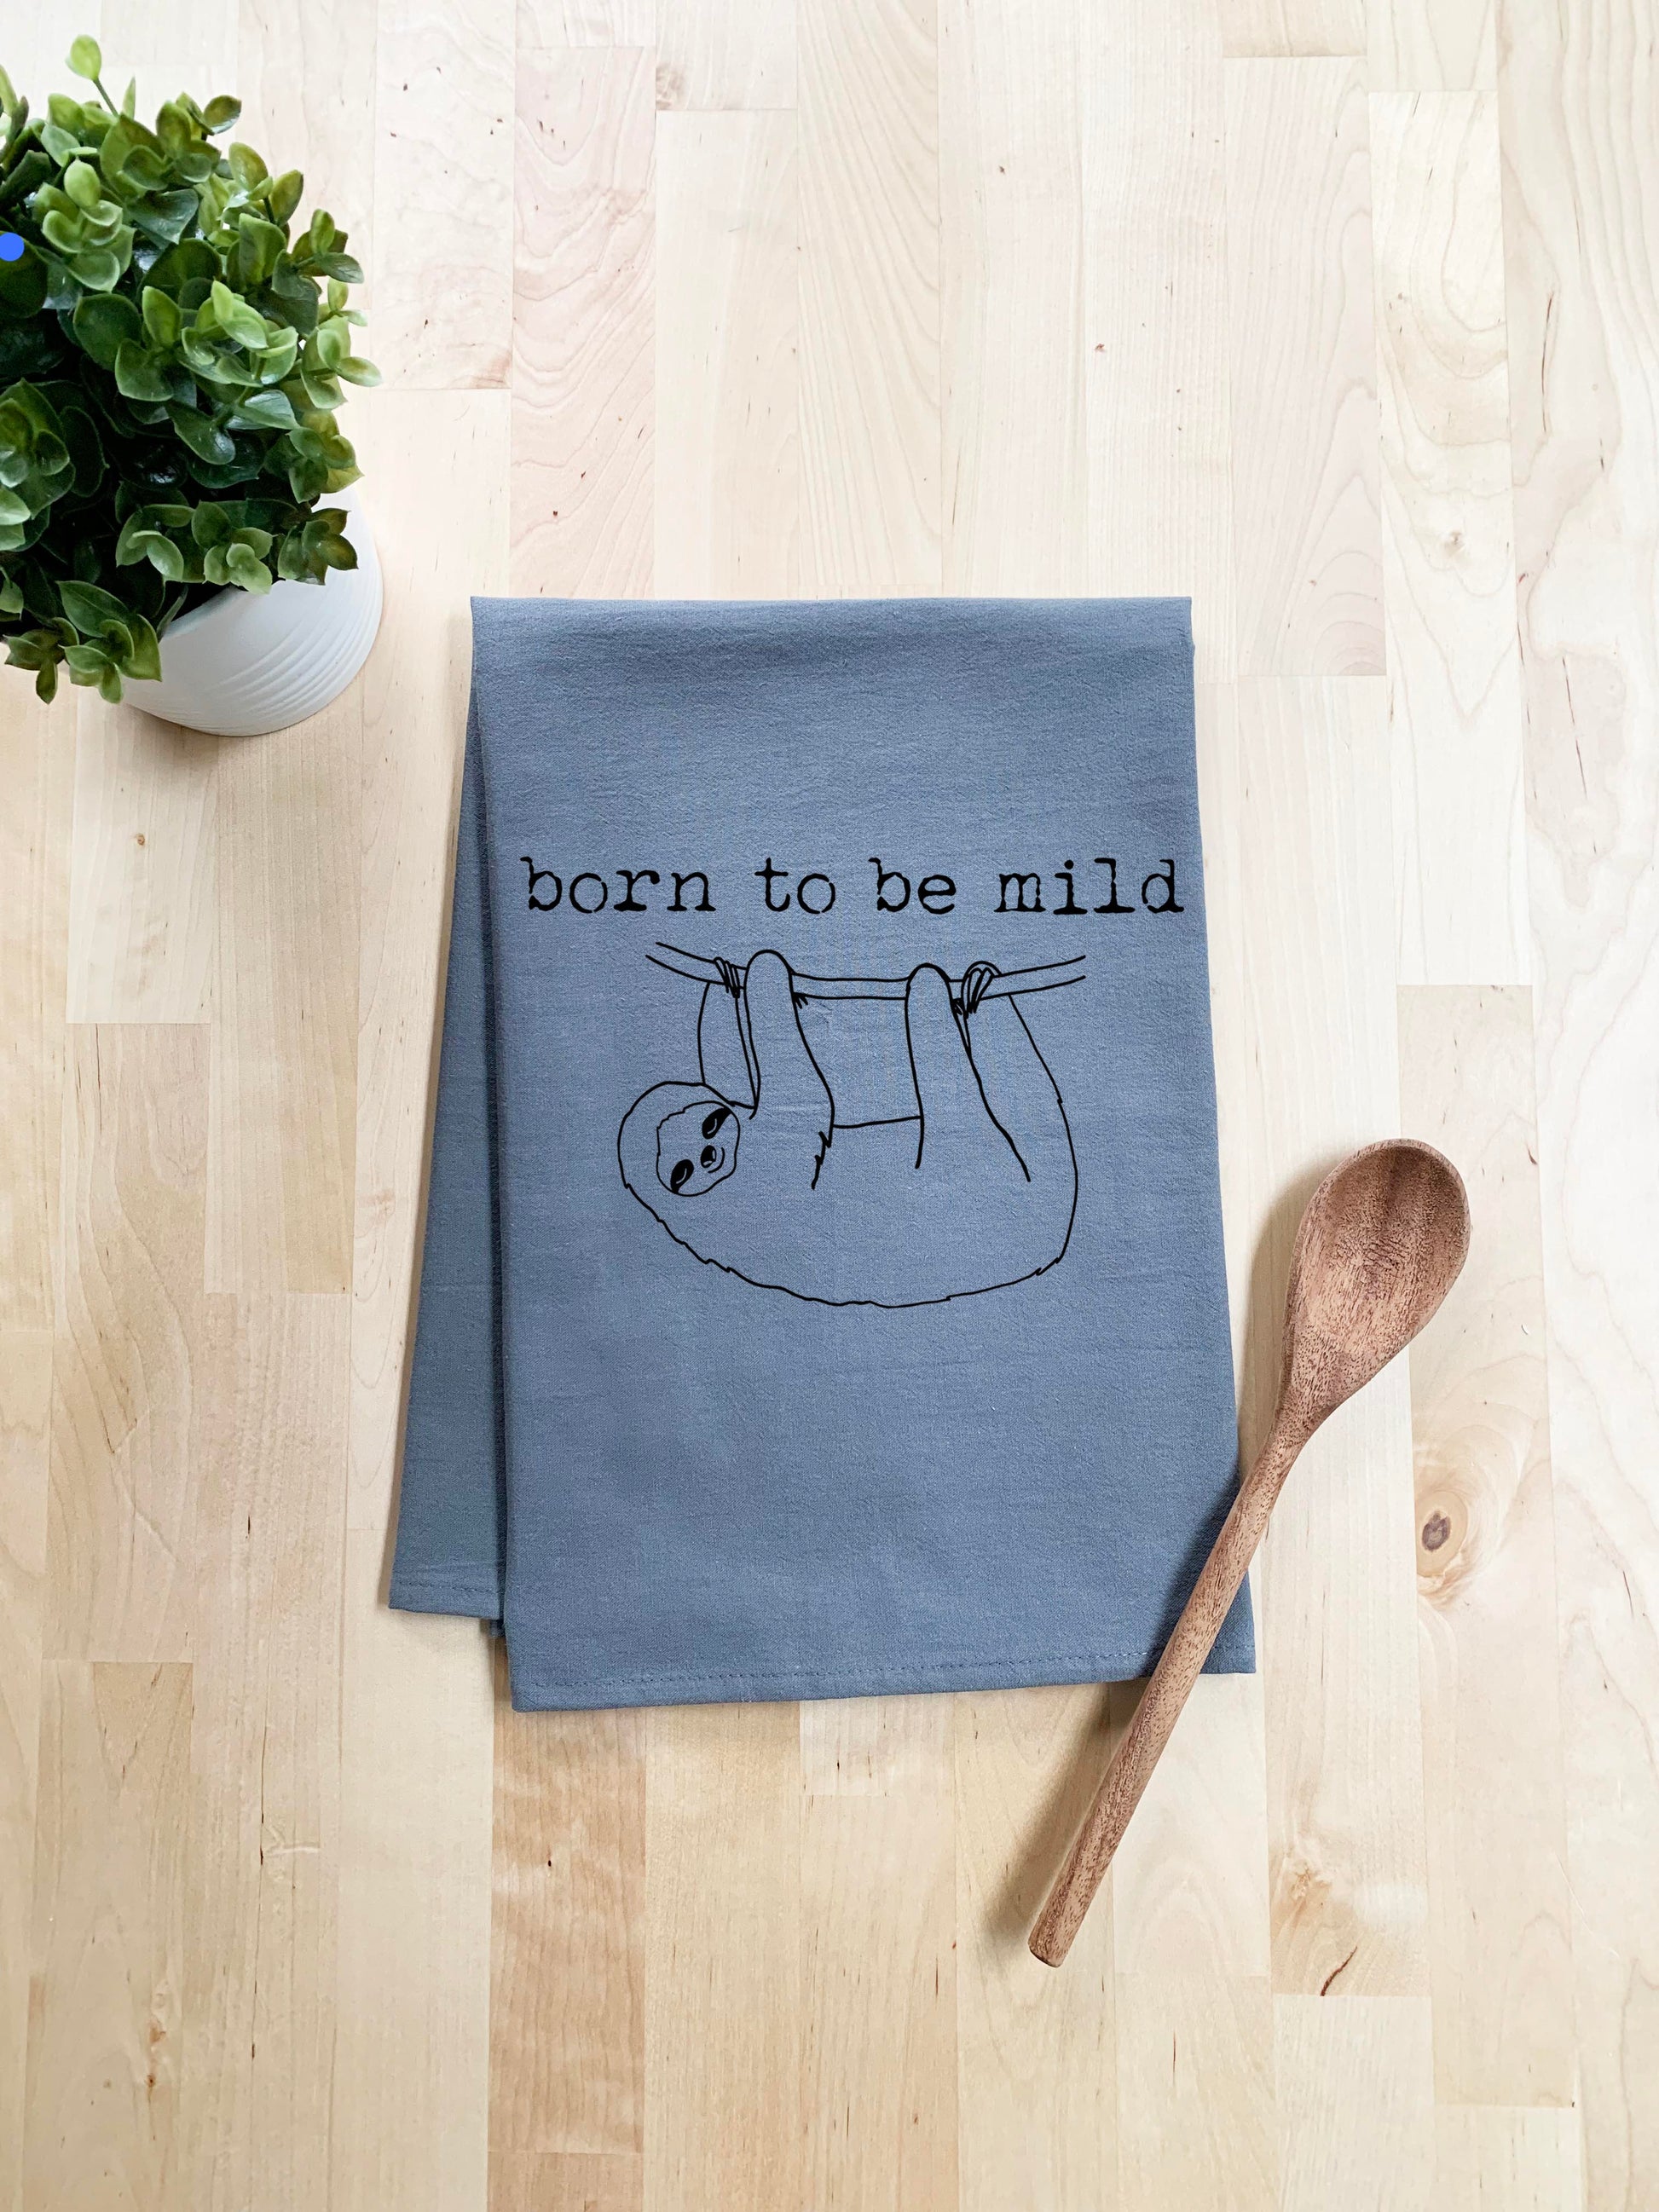 Born To Be Mild Dish Towel - White Or Gray - MoonlightMakers